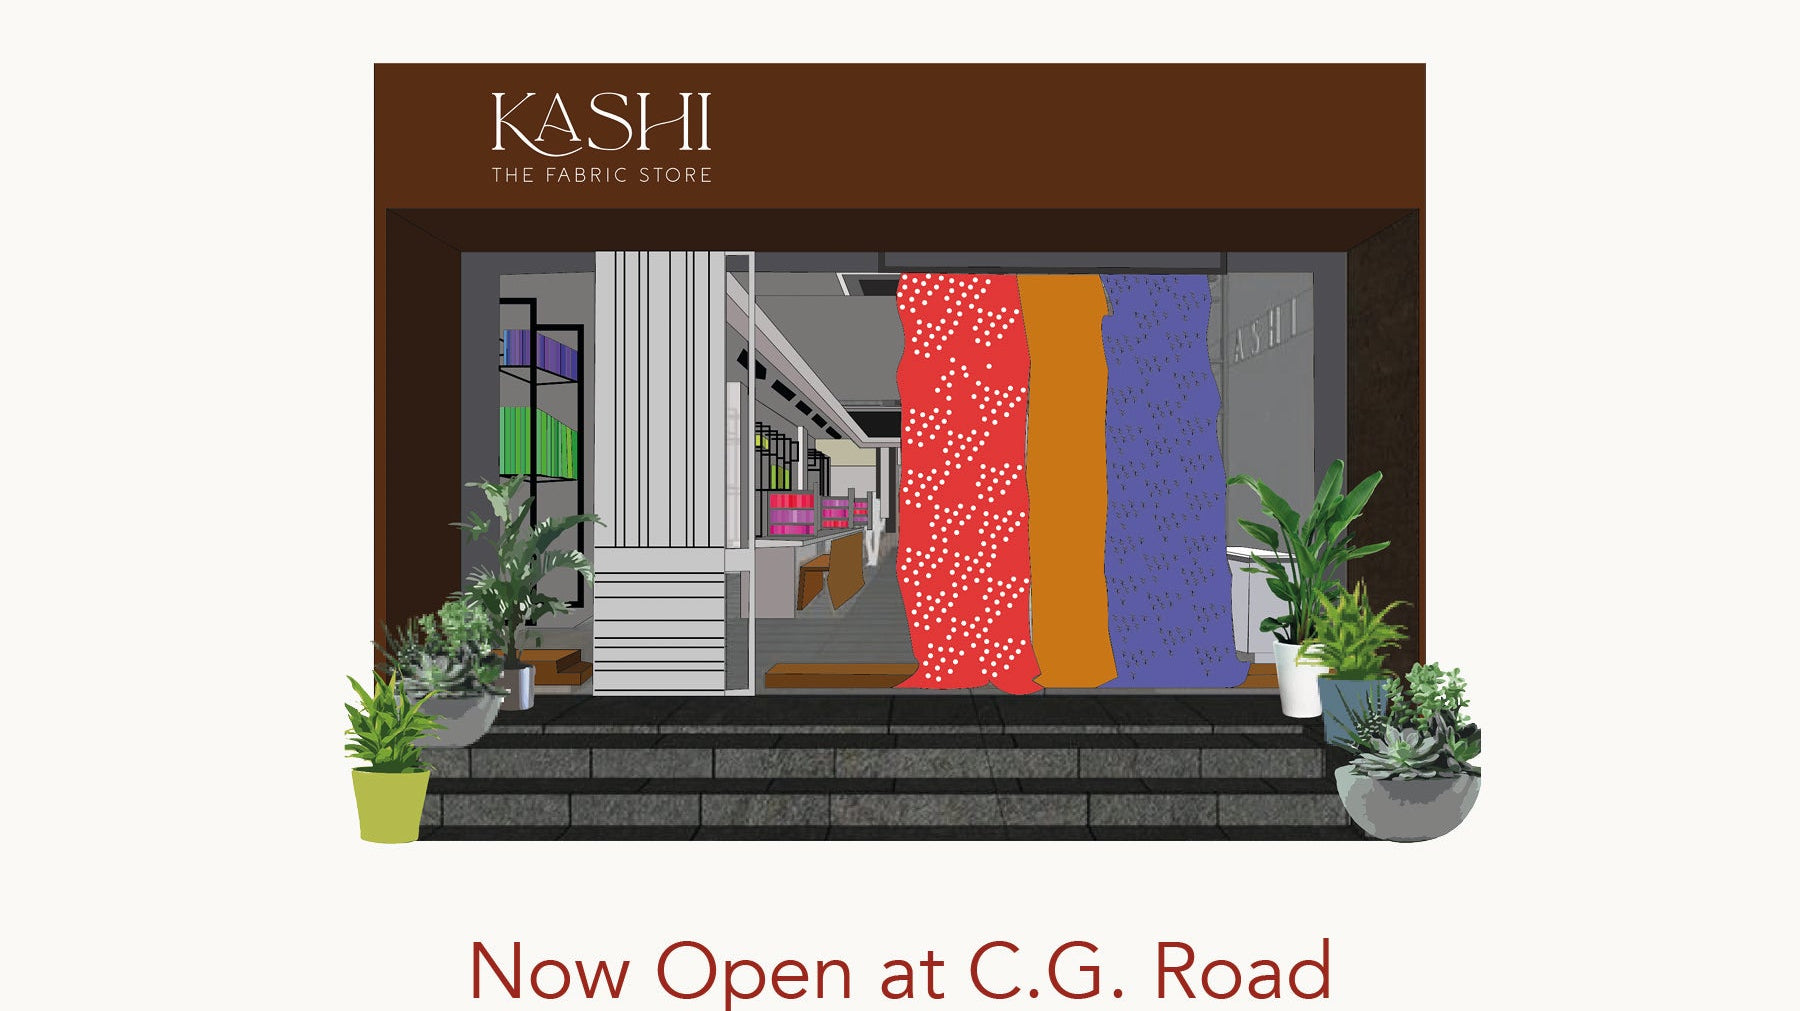 Kashi- The Fabric Store launches its first standalone store in Ahmedabad - Ciceroni